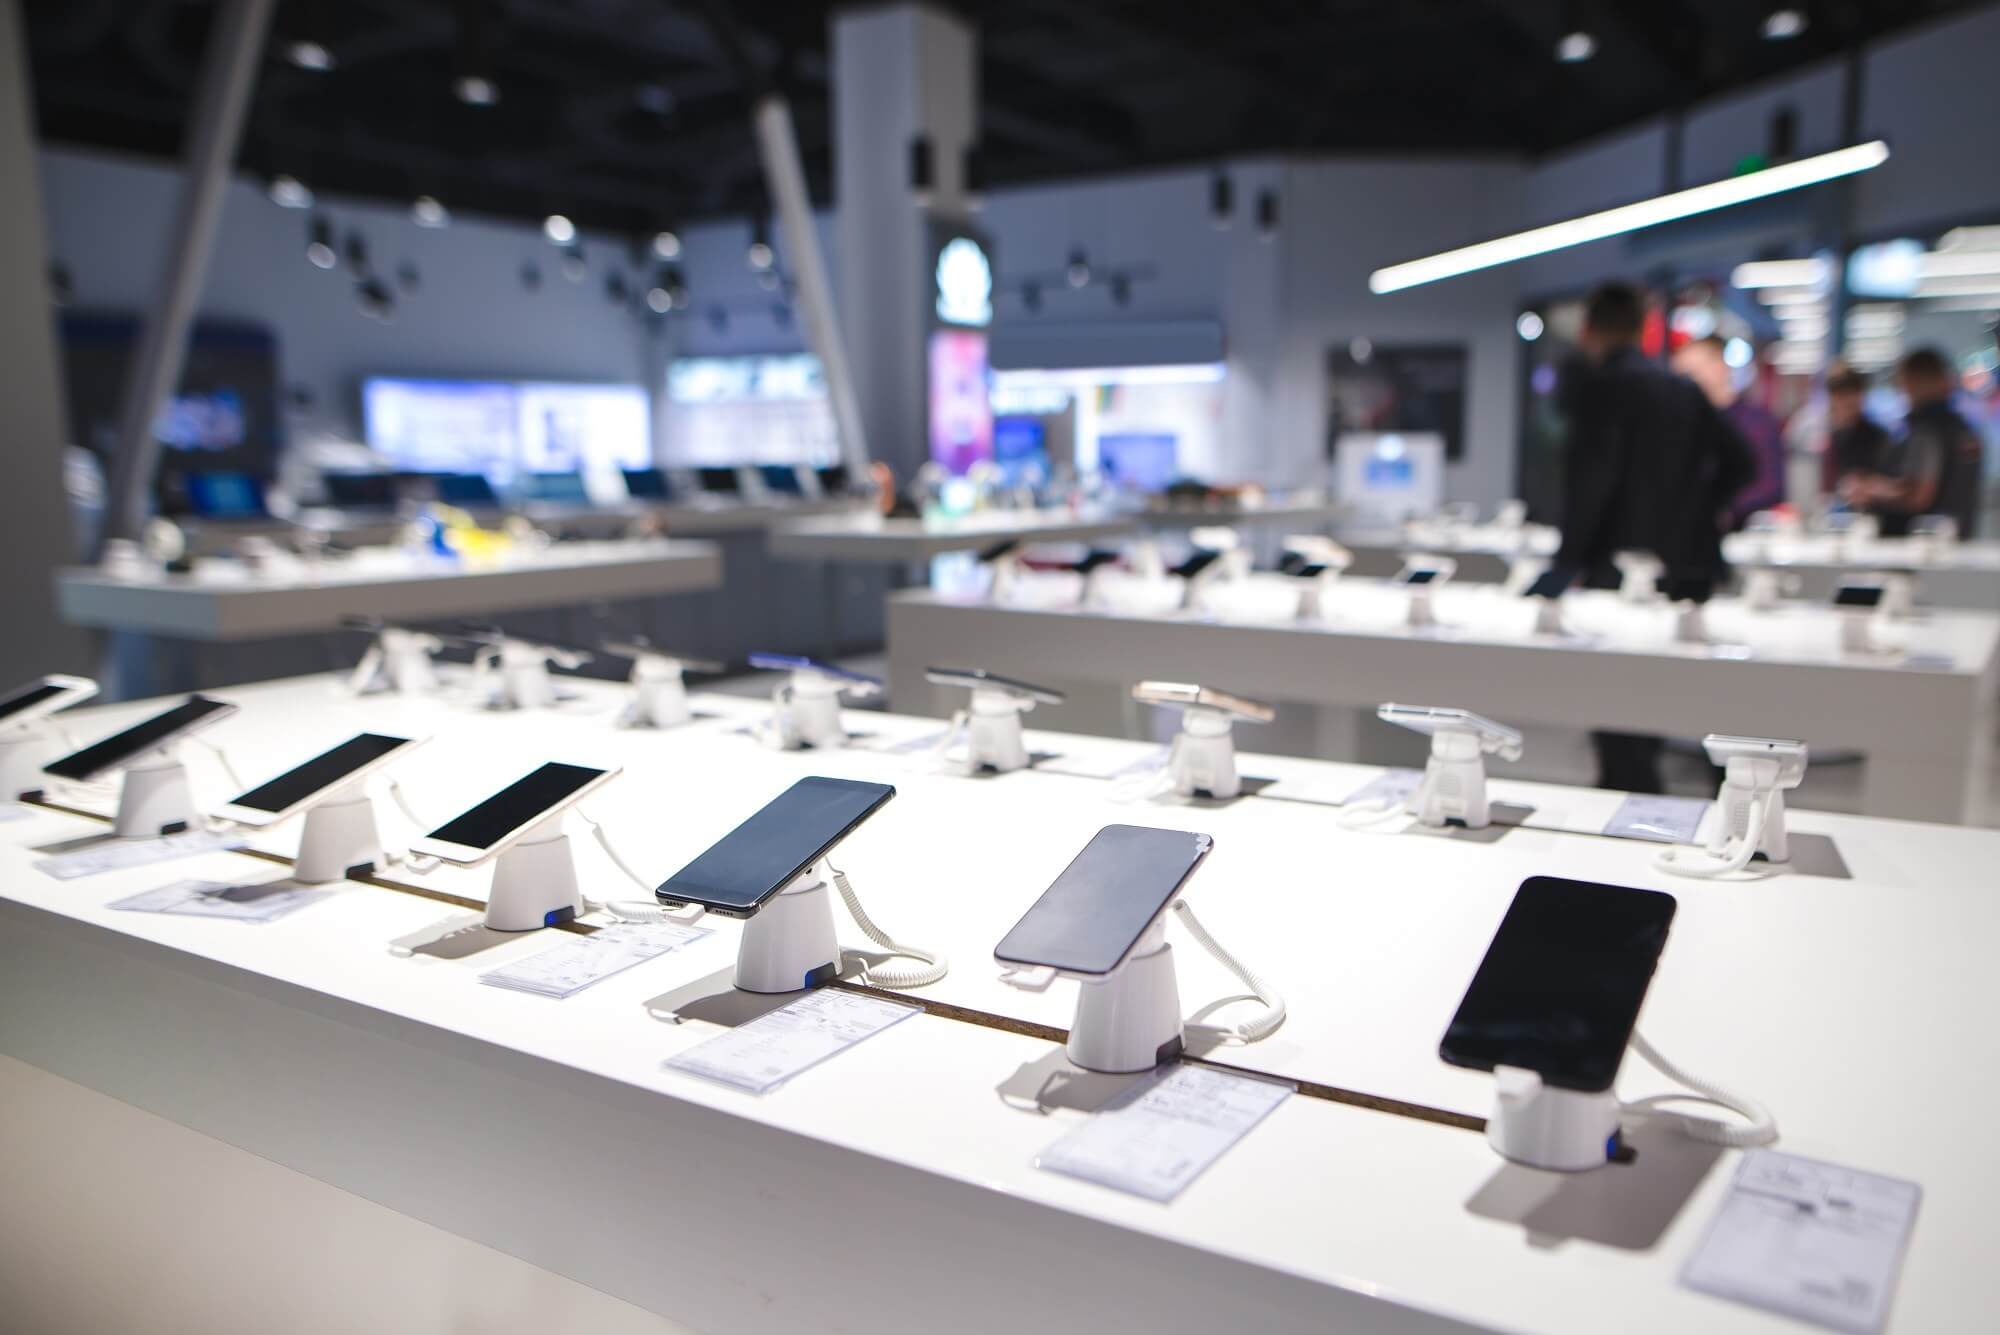 Phone sales predicted to hit ten-year low, but 5G will spearhead recovery in 2021